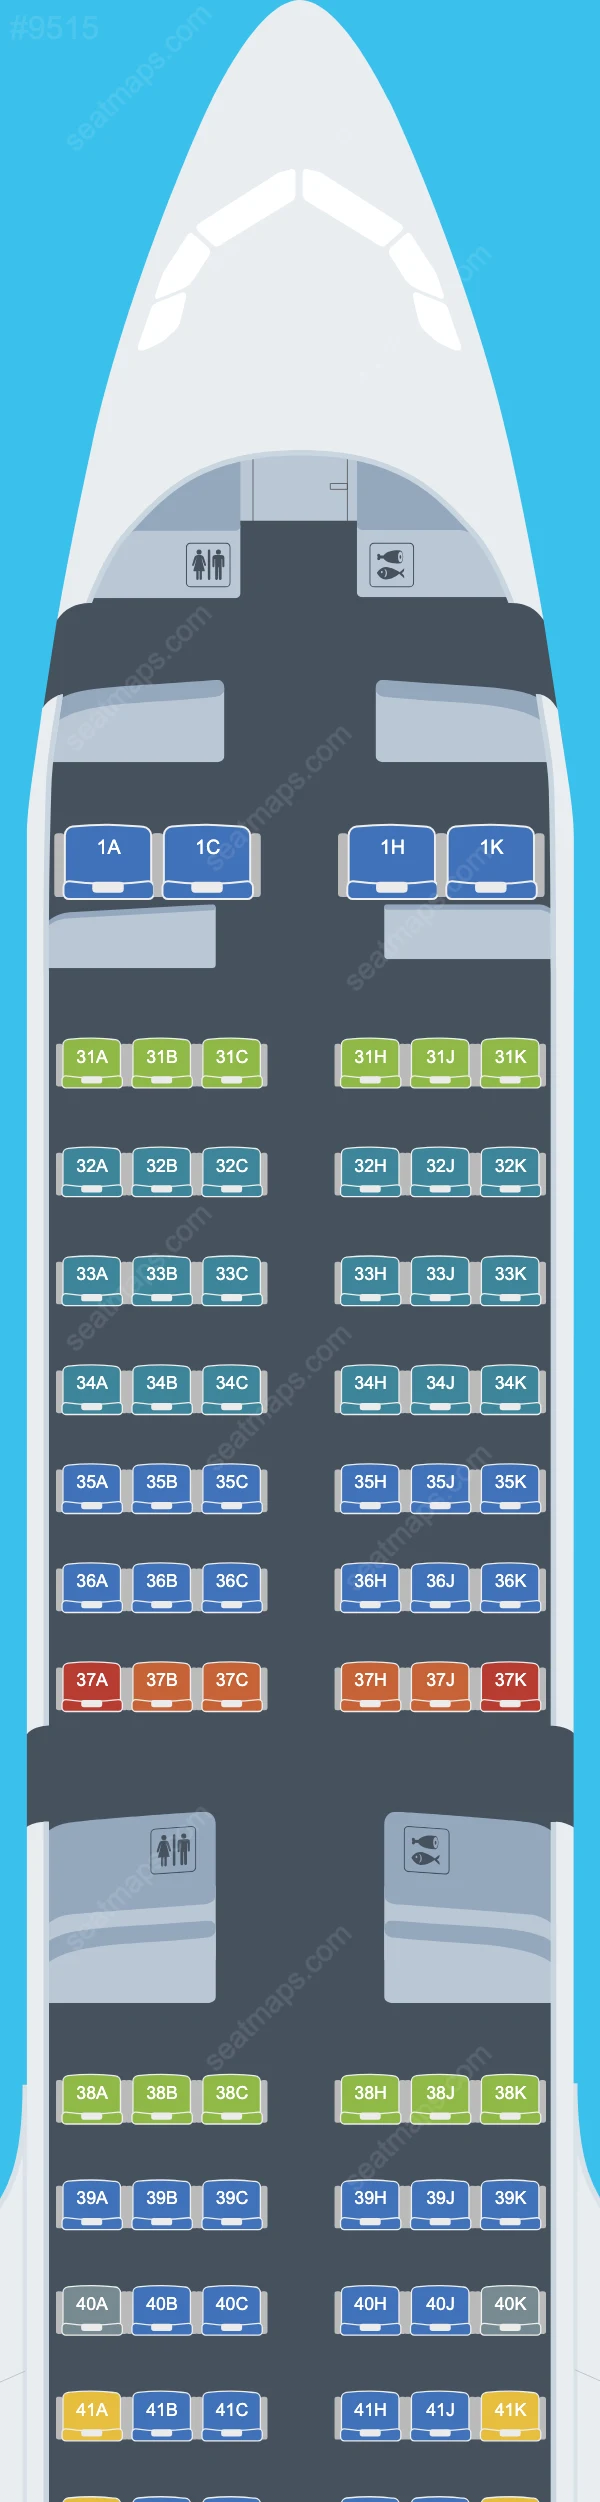 China Southern Airbus A321 Seat Maps A321-200neo V.1